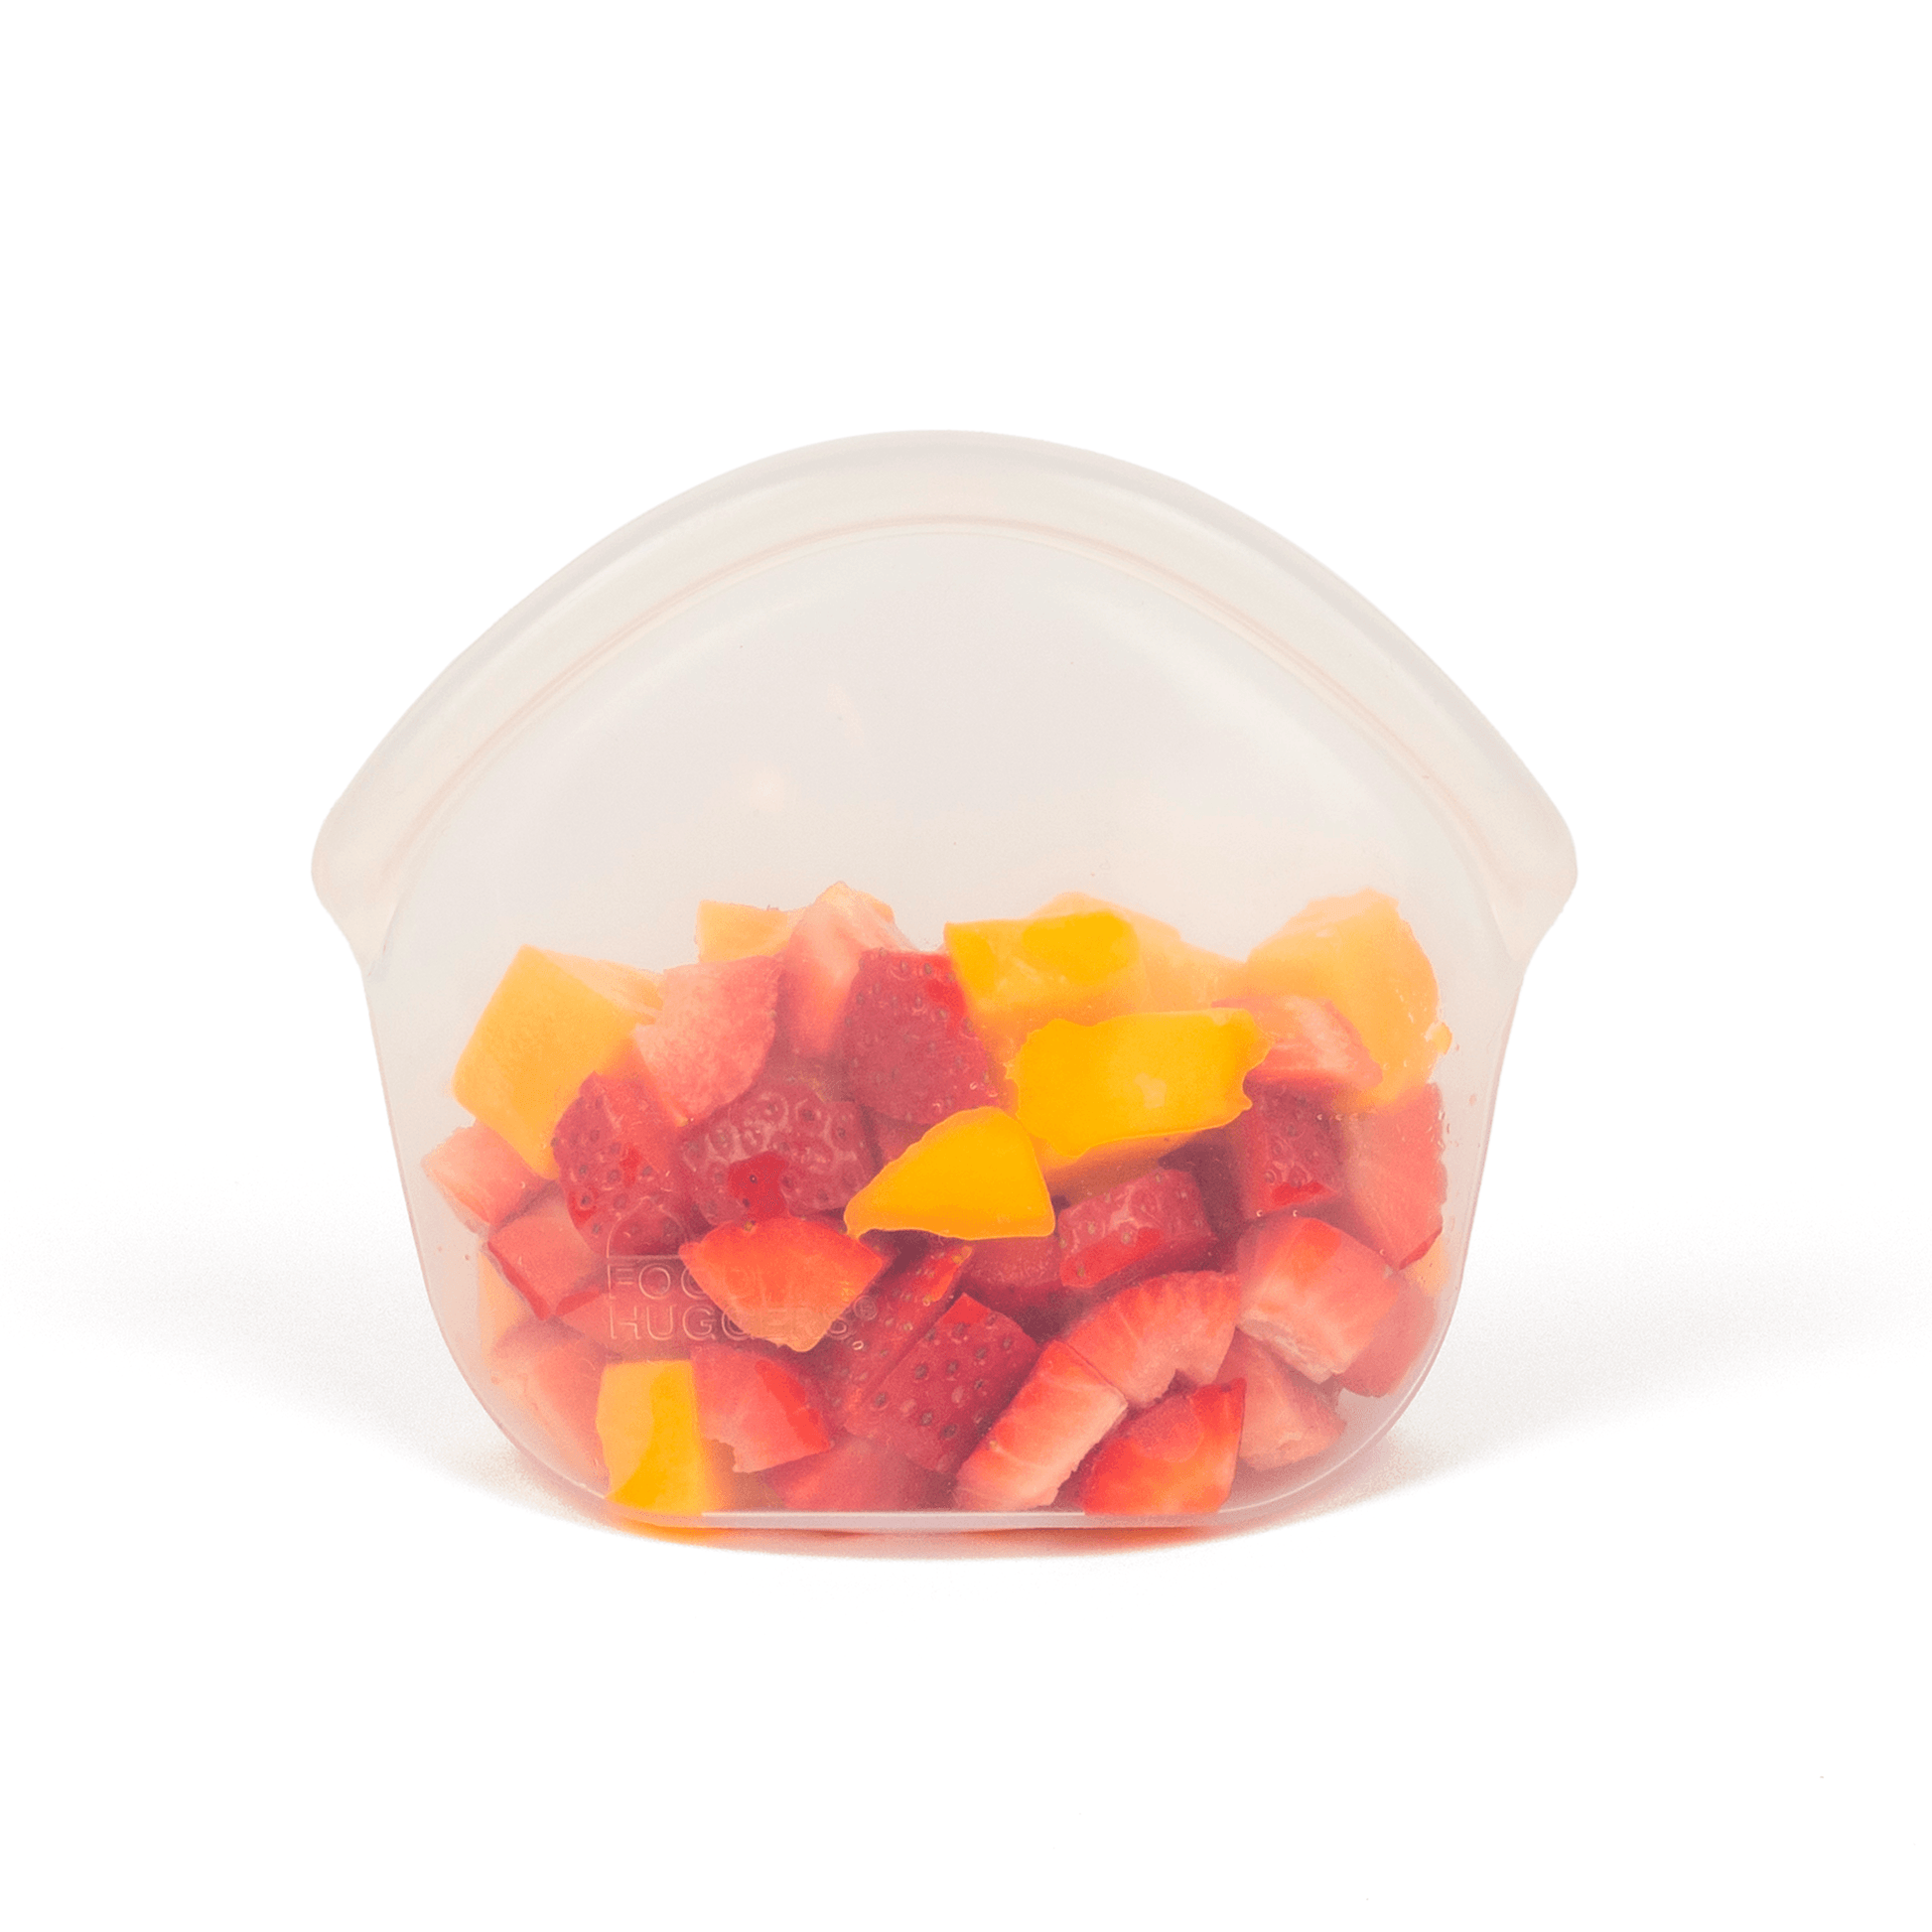 Reusable silicone bag, dishwasher safe, preserving pieces of strawberries and mango, zero waste